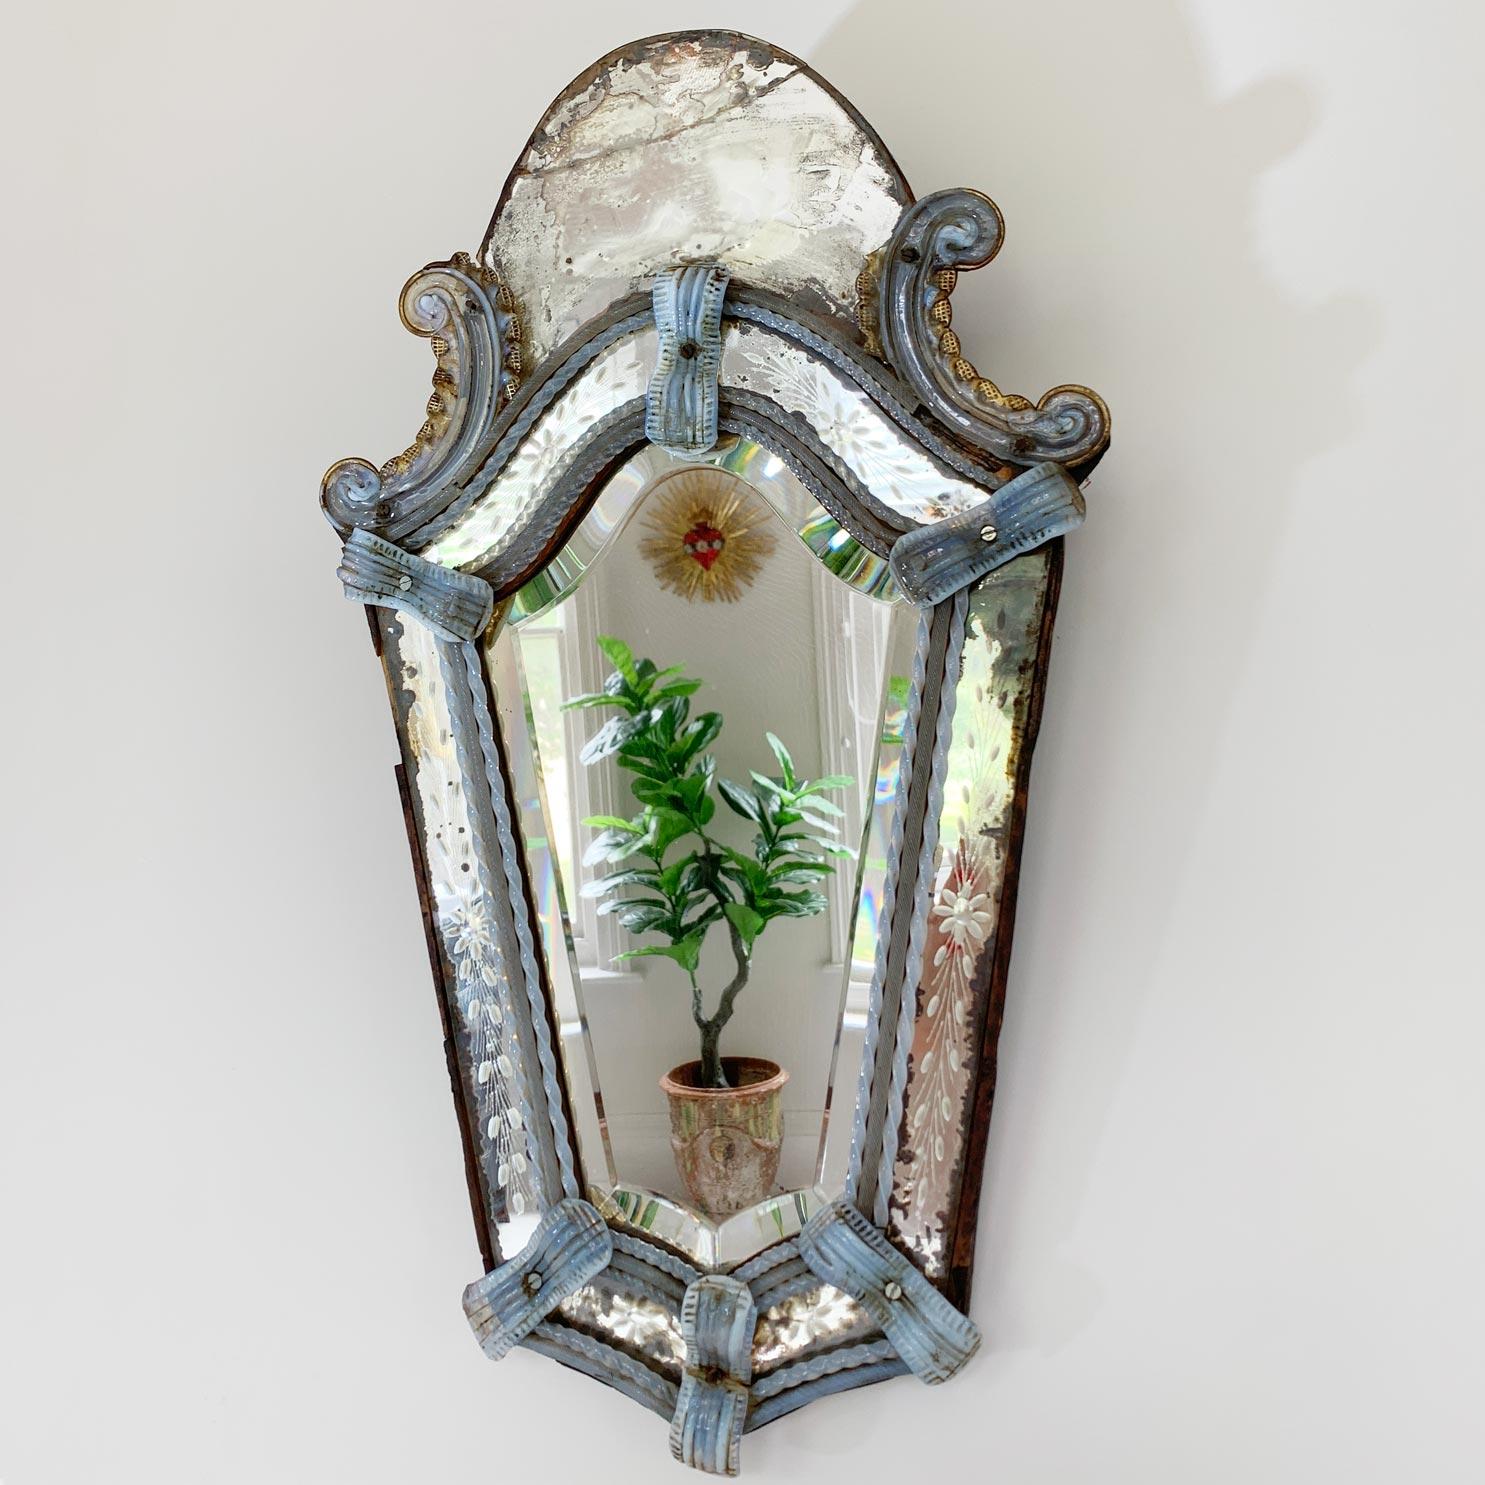 An achingly pretty 19th century Venetian murano glass wall mirror, with etched griffon holding St.Mark's gospel under it's front paw. The opaque light blue glass twists and bows are exquisitely made, the flower or possibly sun and wheat etched